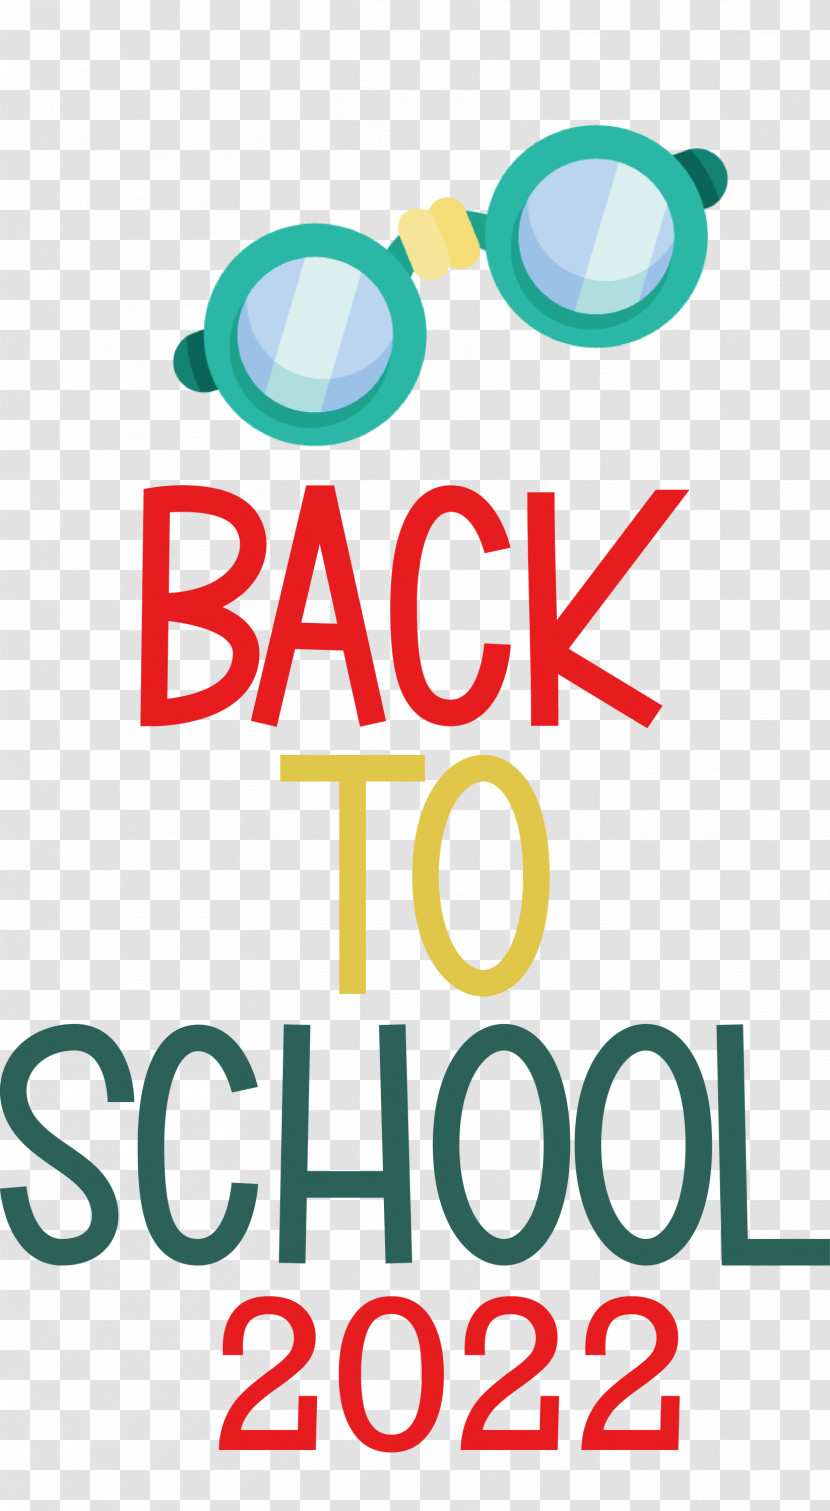 Back To School 2022 Education Transparent PNG